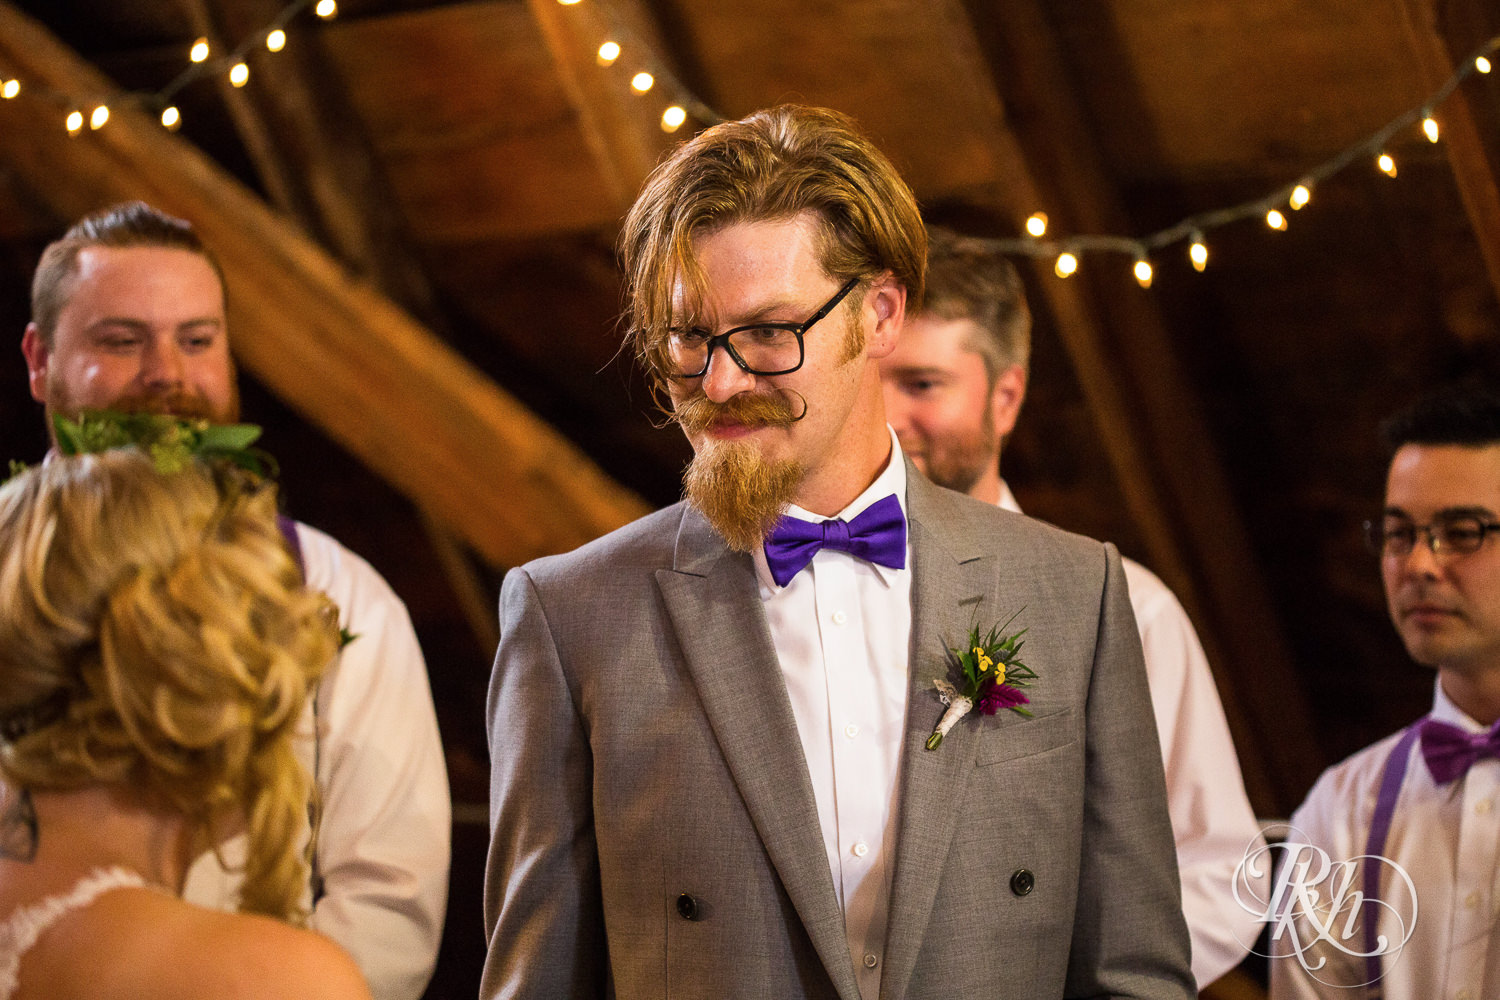 Bride and groom smile during wedding ceremony at Coops Event Barn in Dodge Center, Minnesota.